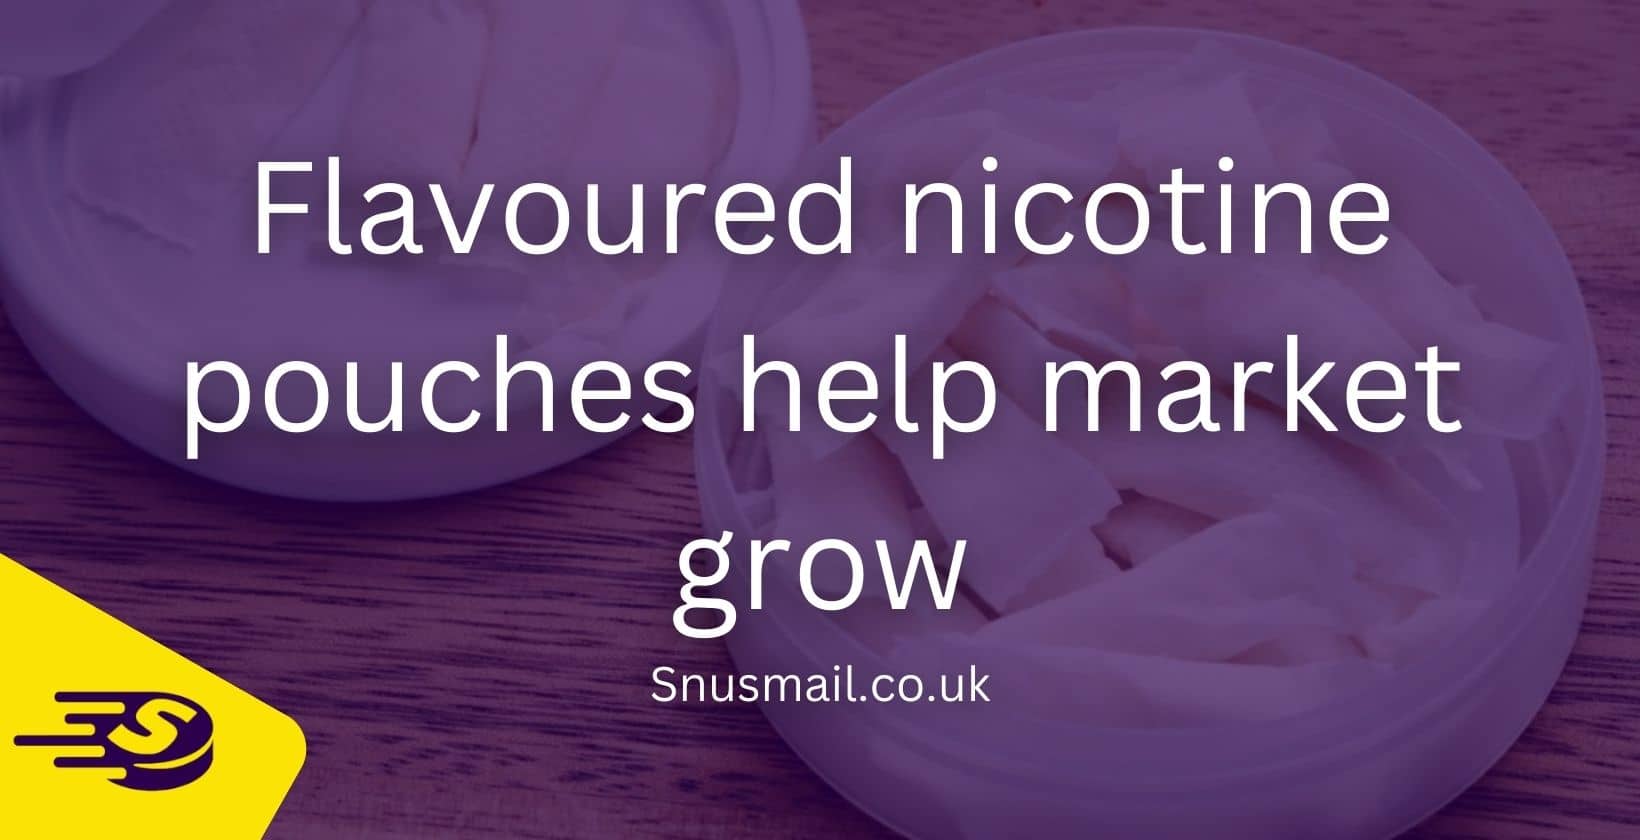 Flavoured nicotine pouches help market grow Snusmail.co.uk